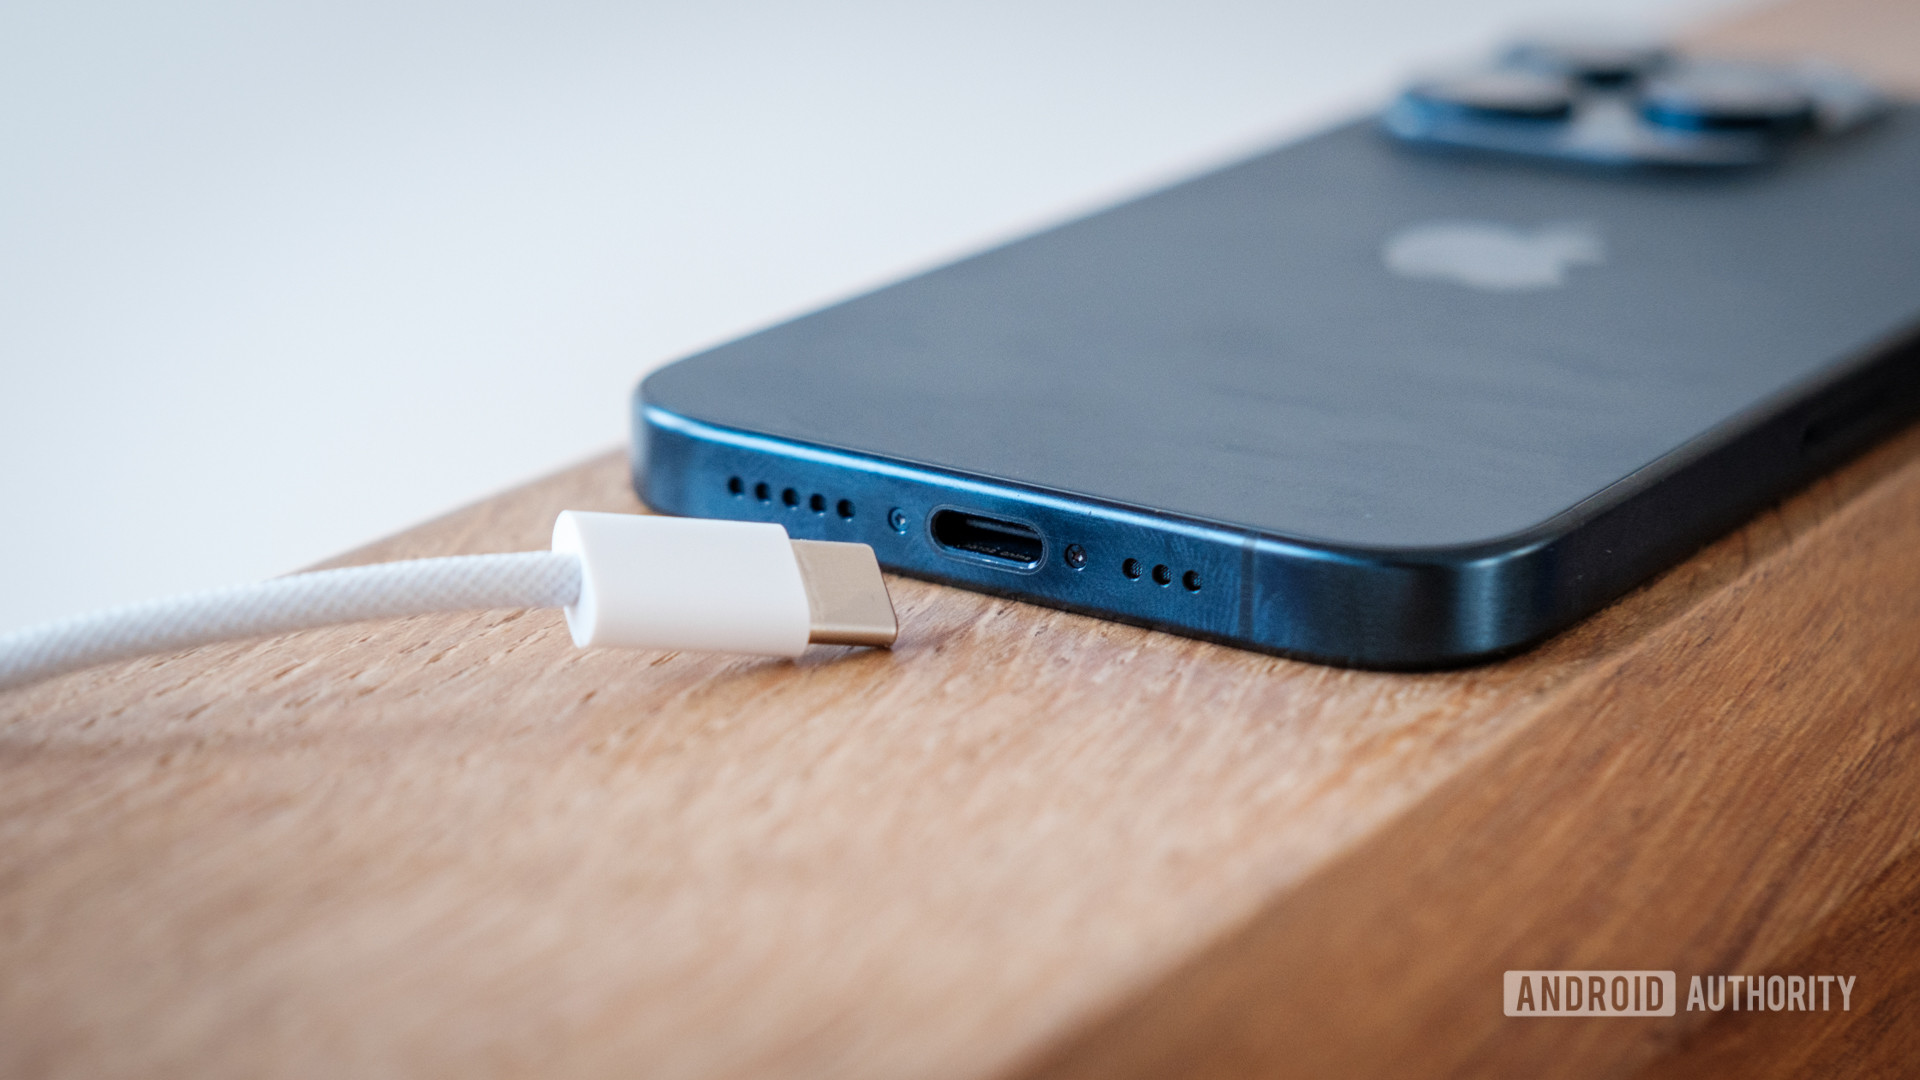 How To Fix An iPhone Charger Cable That Isn't Working